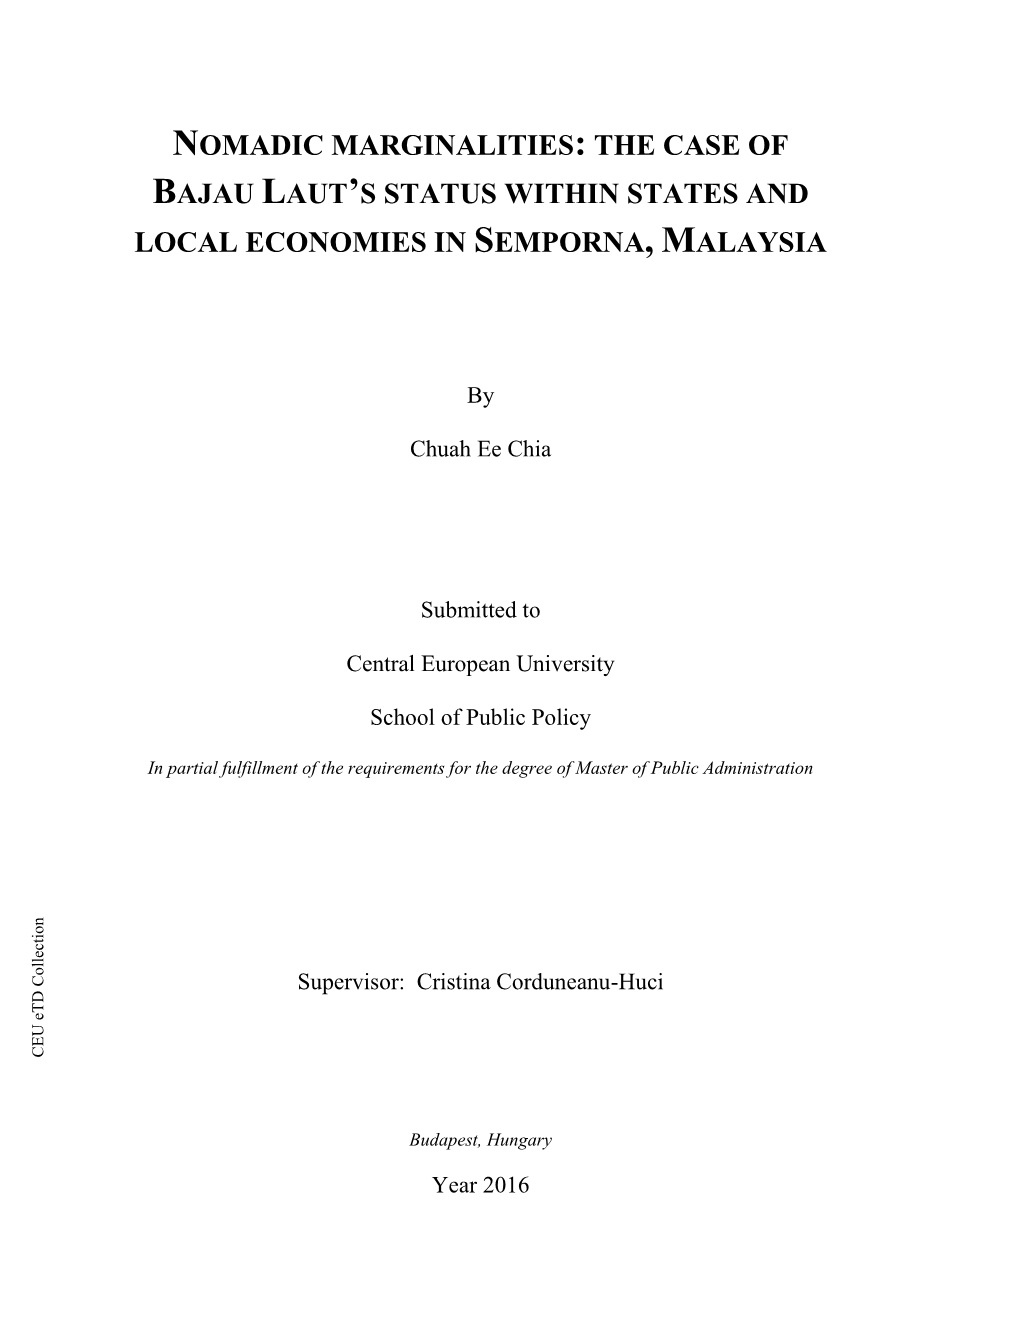 The Case of Bajau Laut's Status Within States And